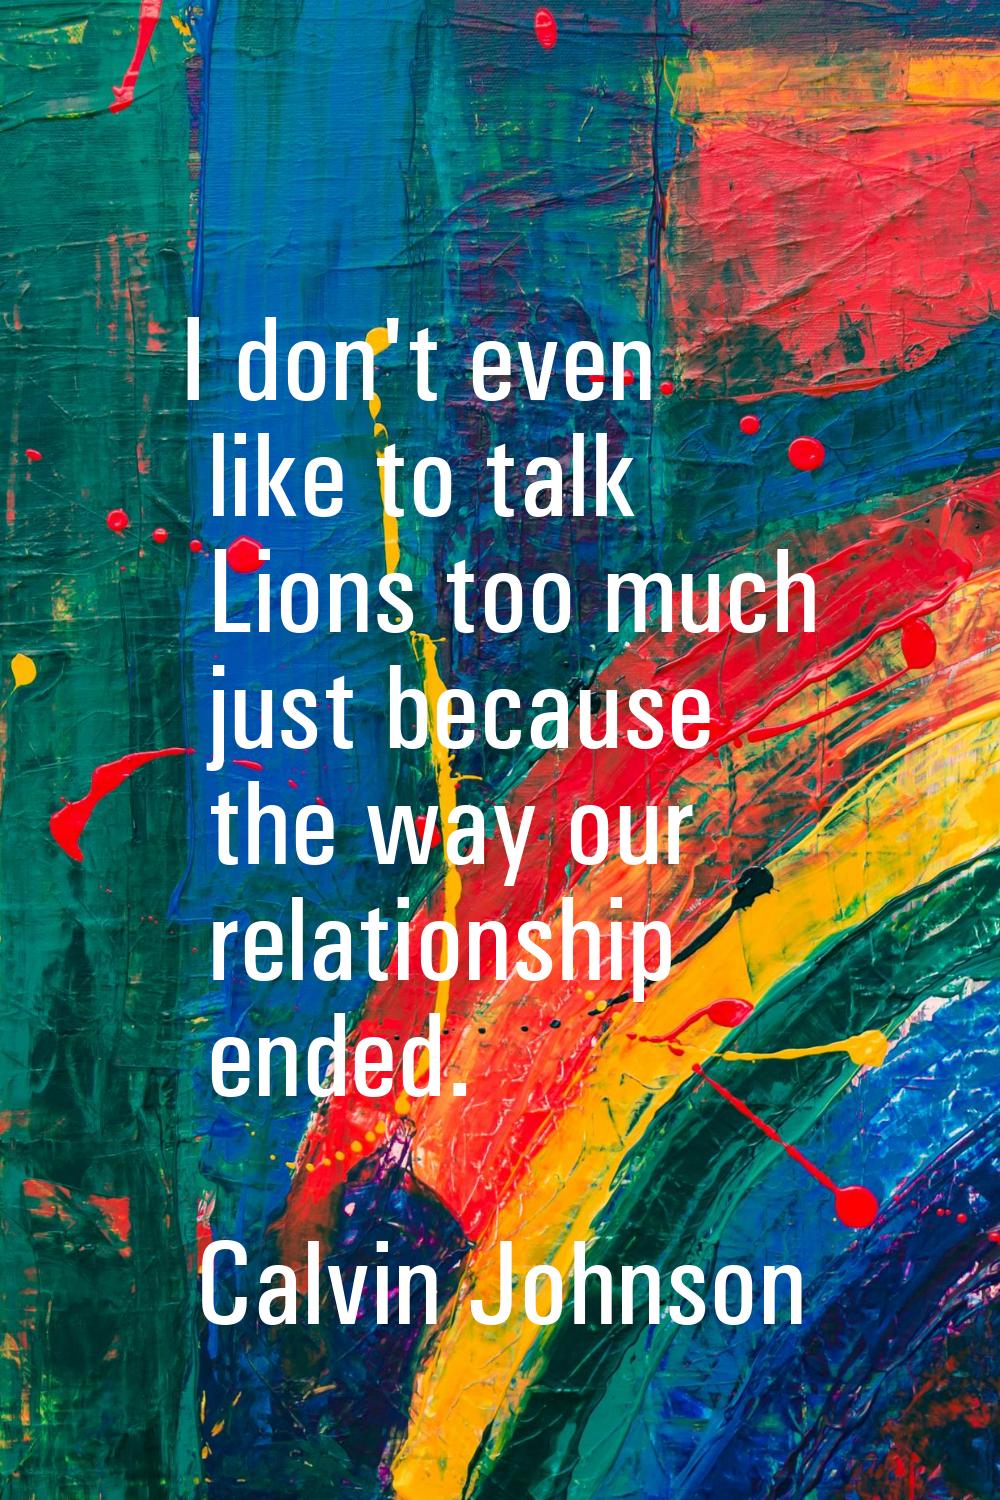 I don't even like to talk Lions too much just because the way our relationship ended.